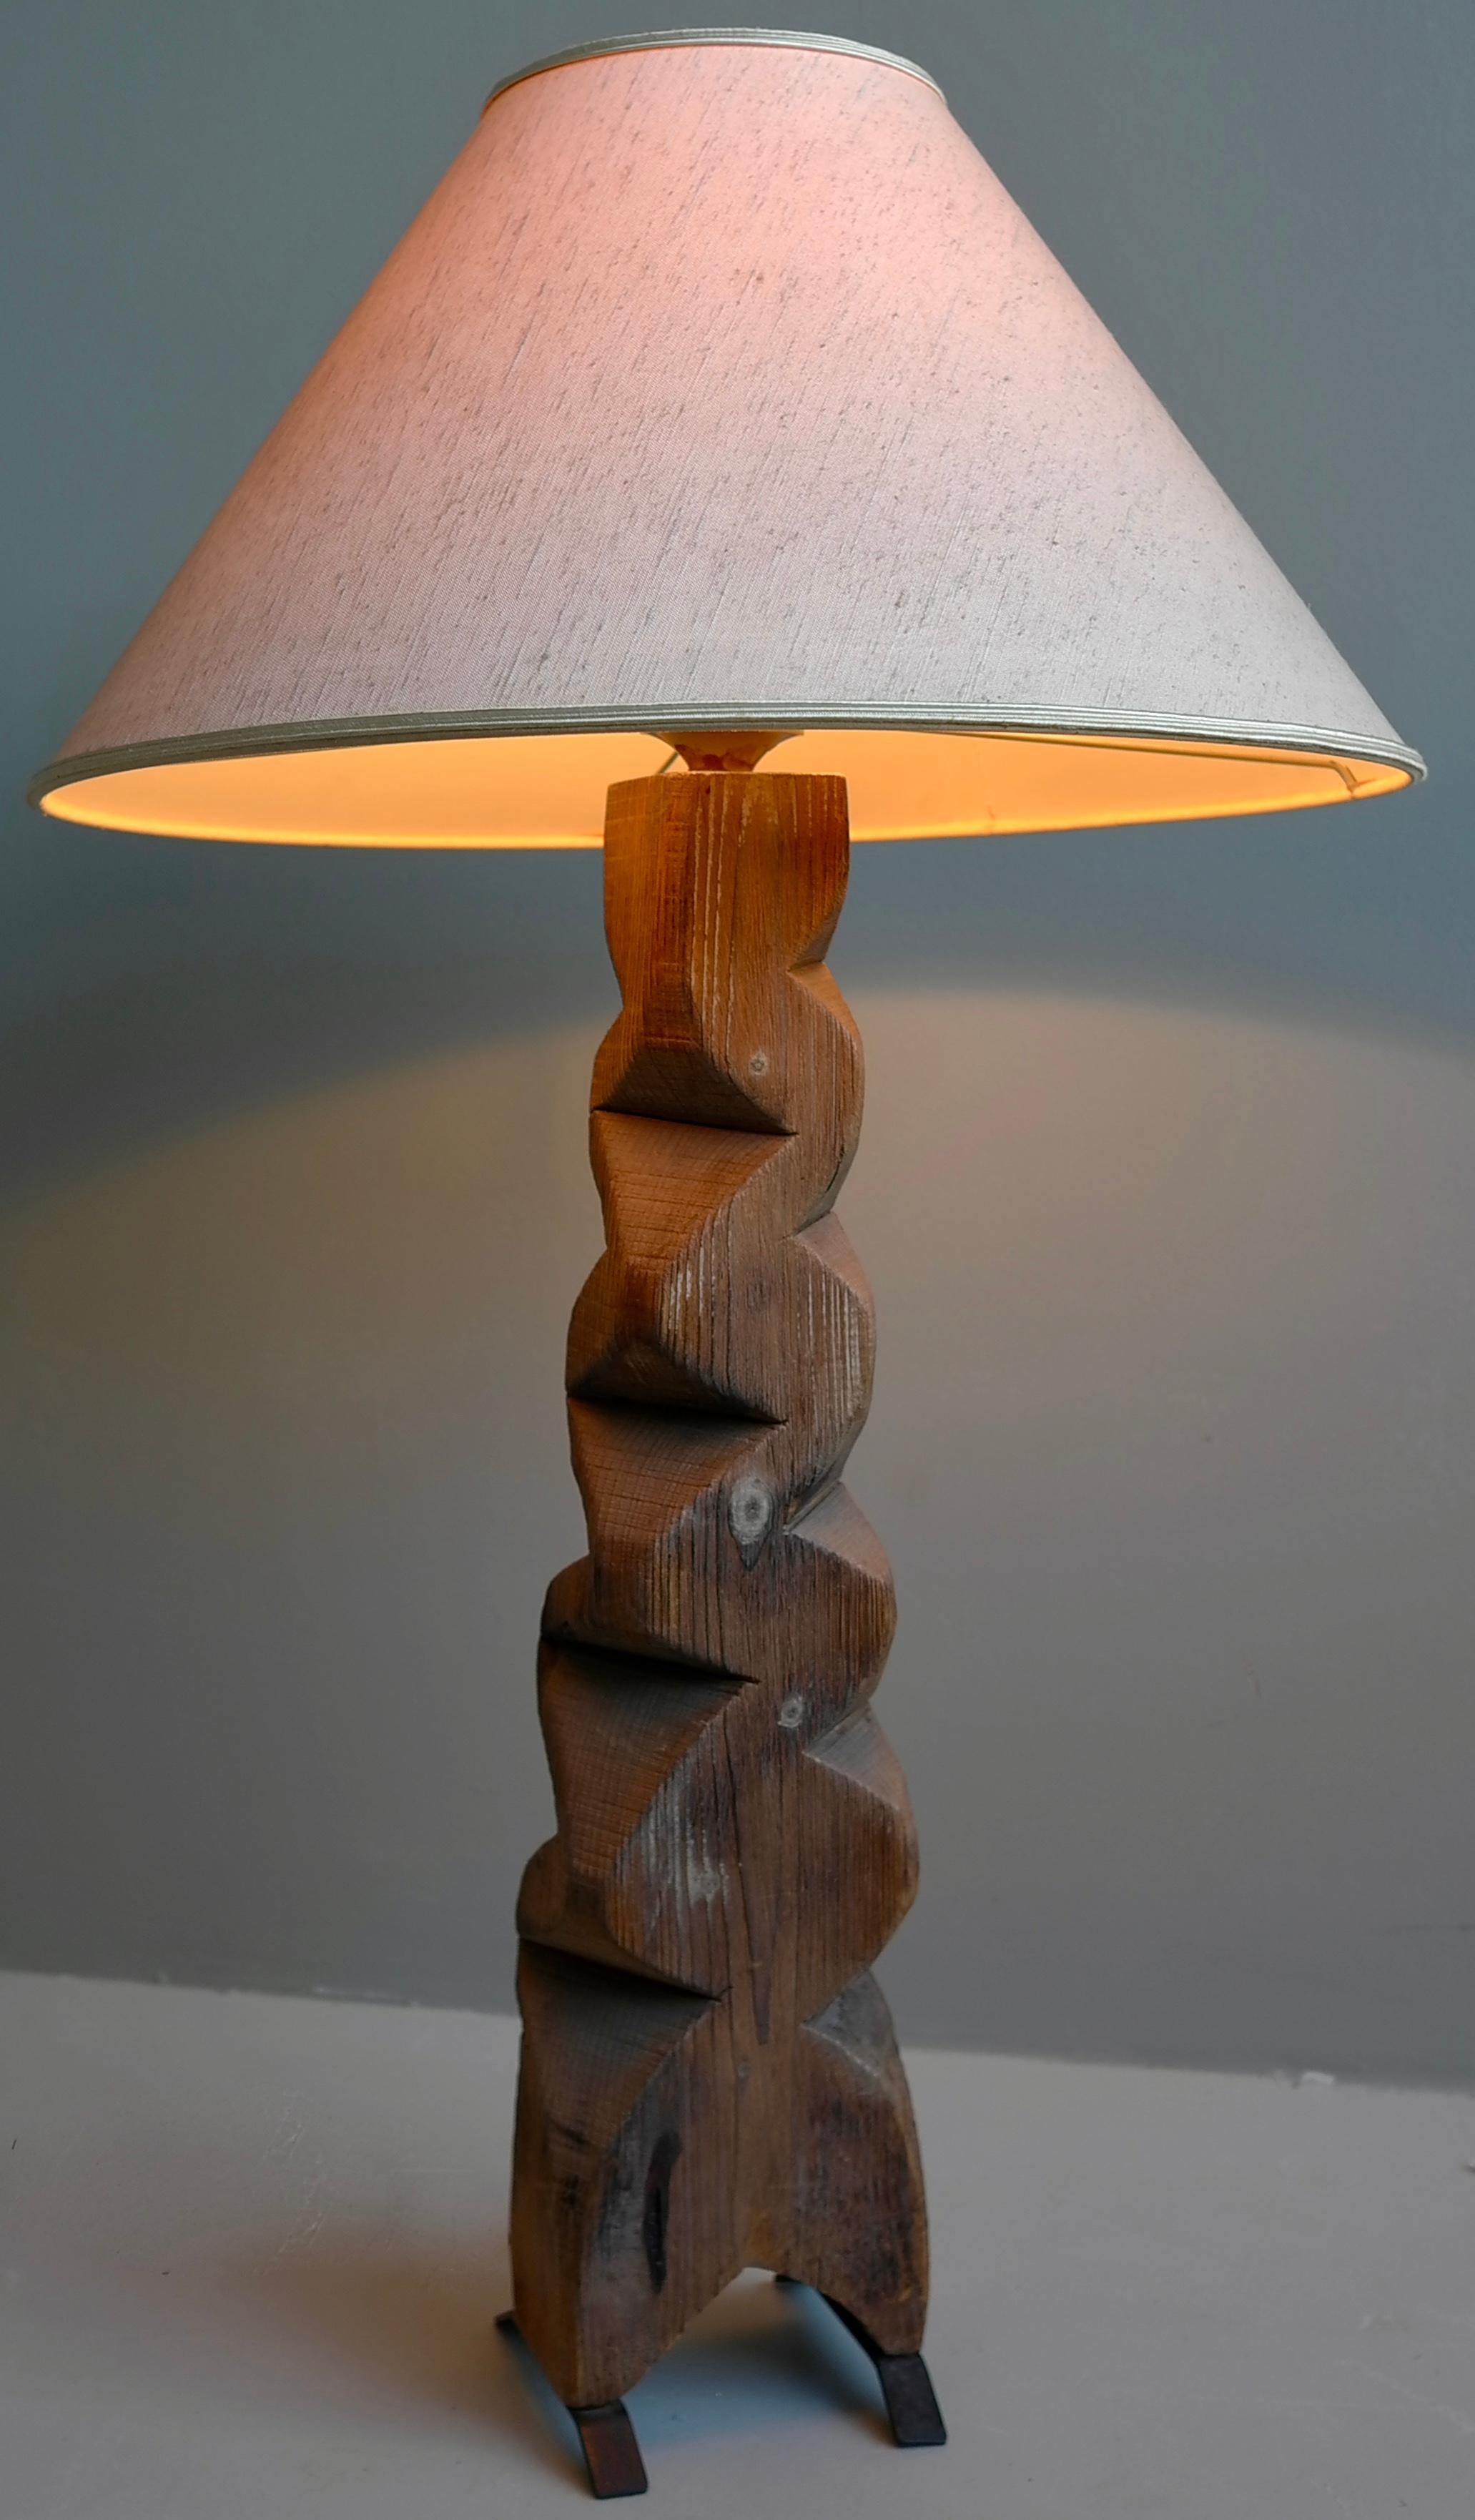 Dutch Large Mid-Century Modern Wooden Sculpture Table Lamp, off White Silk Shade, 1965 For Sale